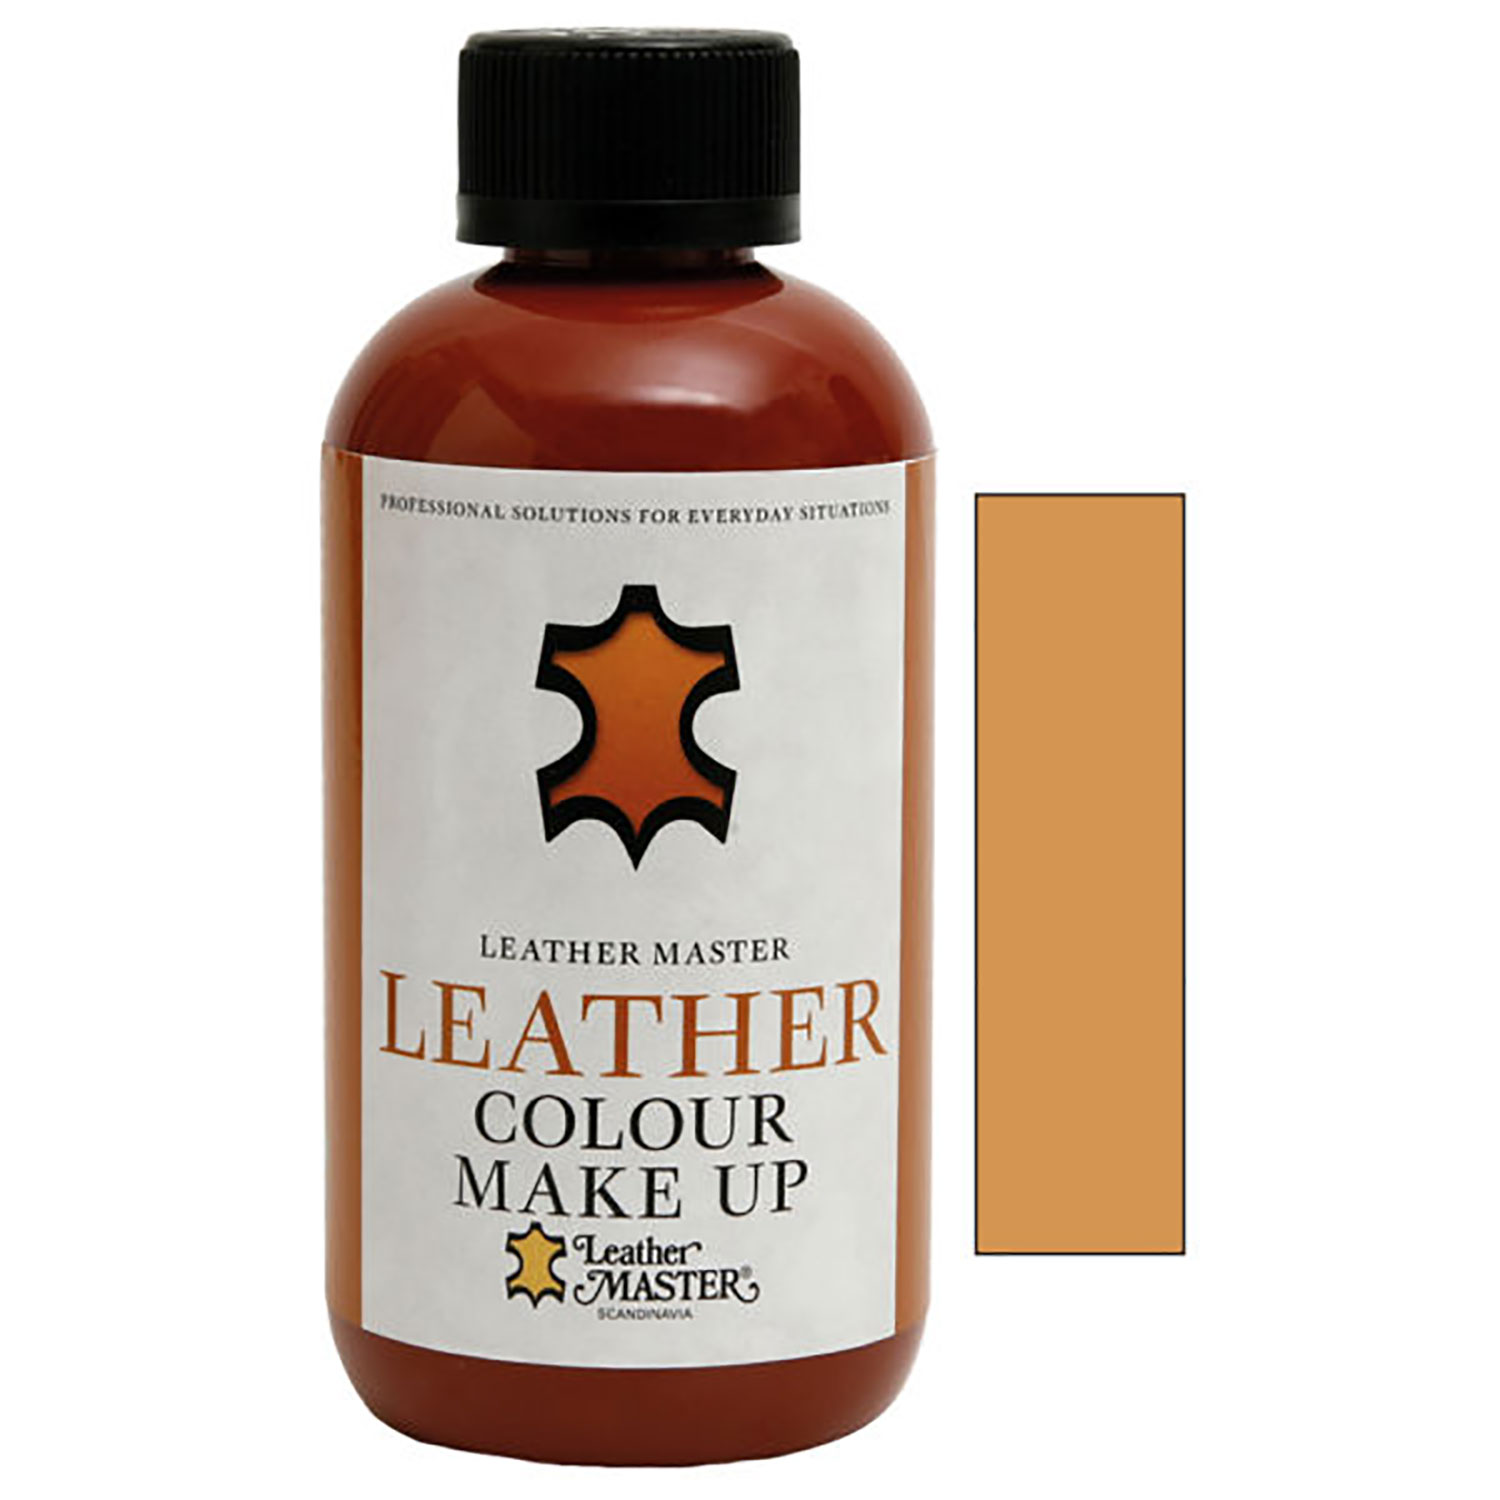 Leather Master Colour make up – yellow brown 250 ml